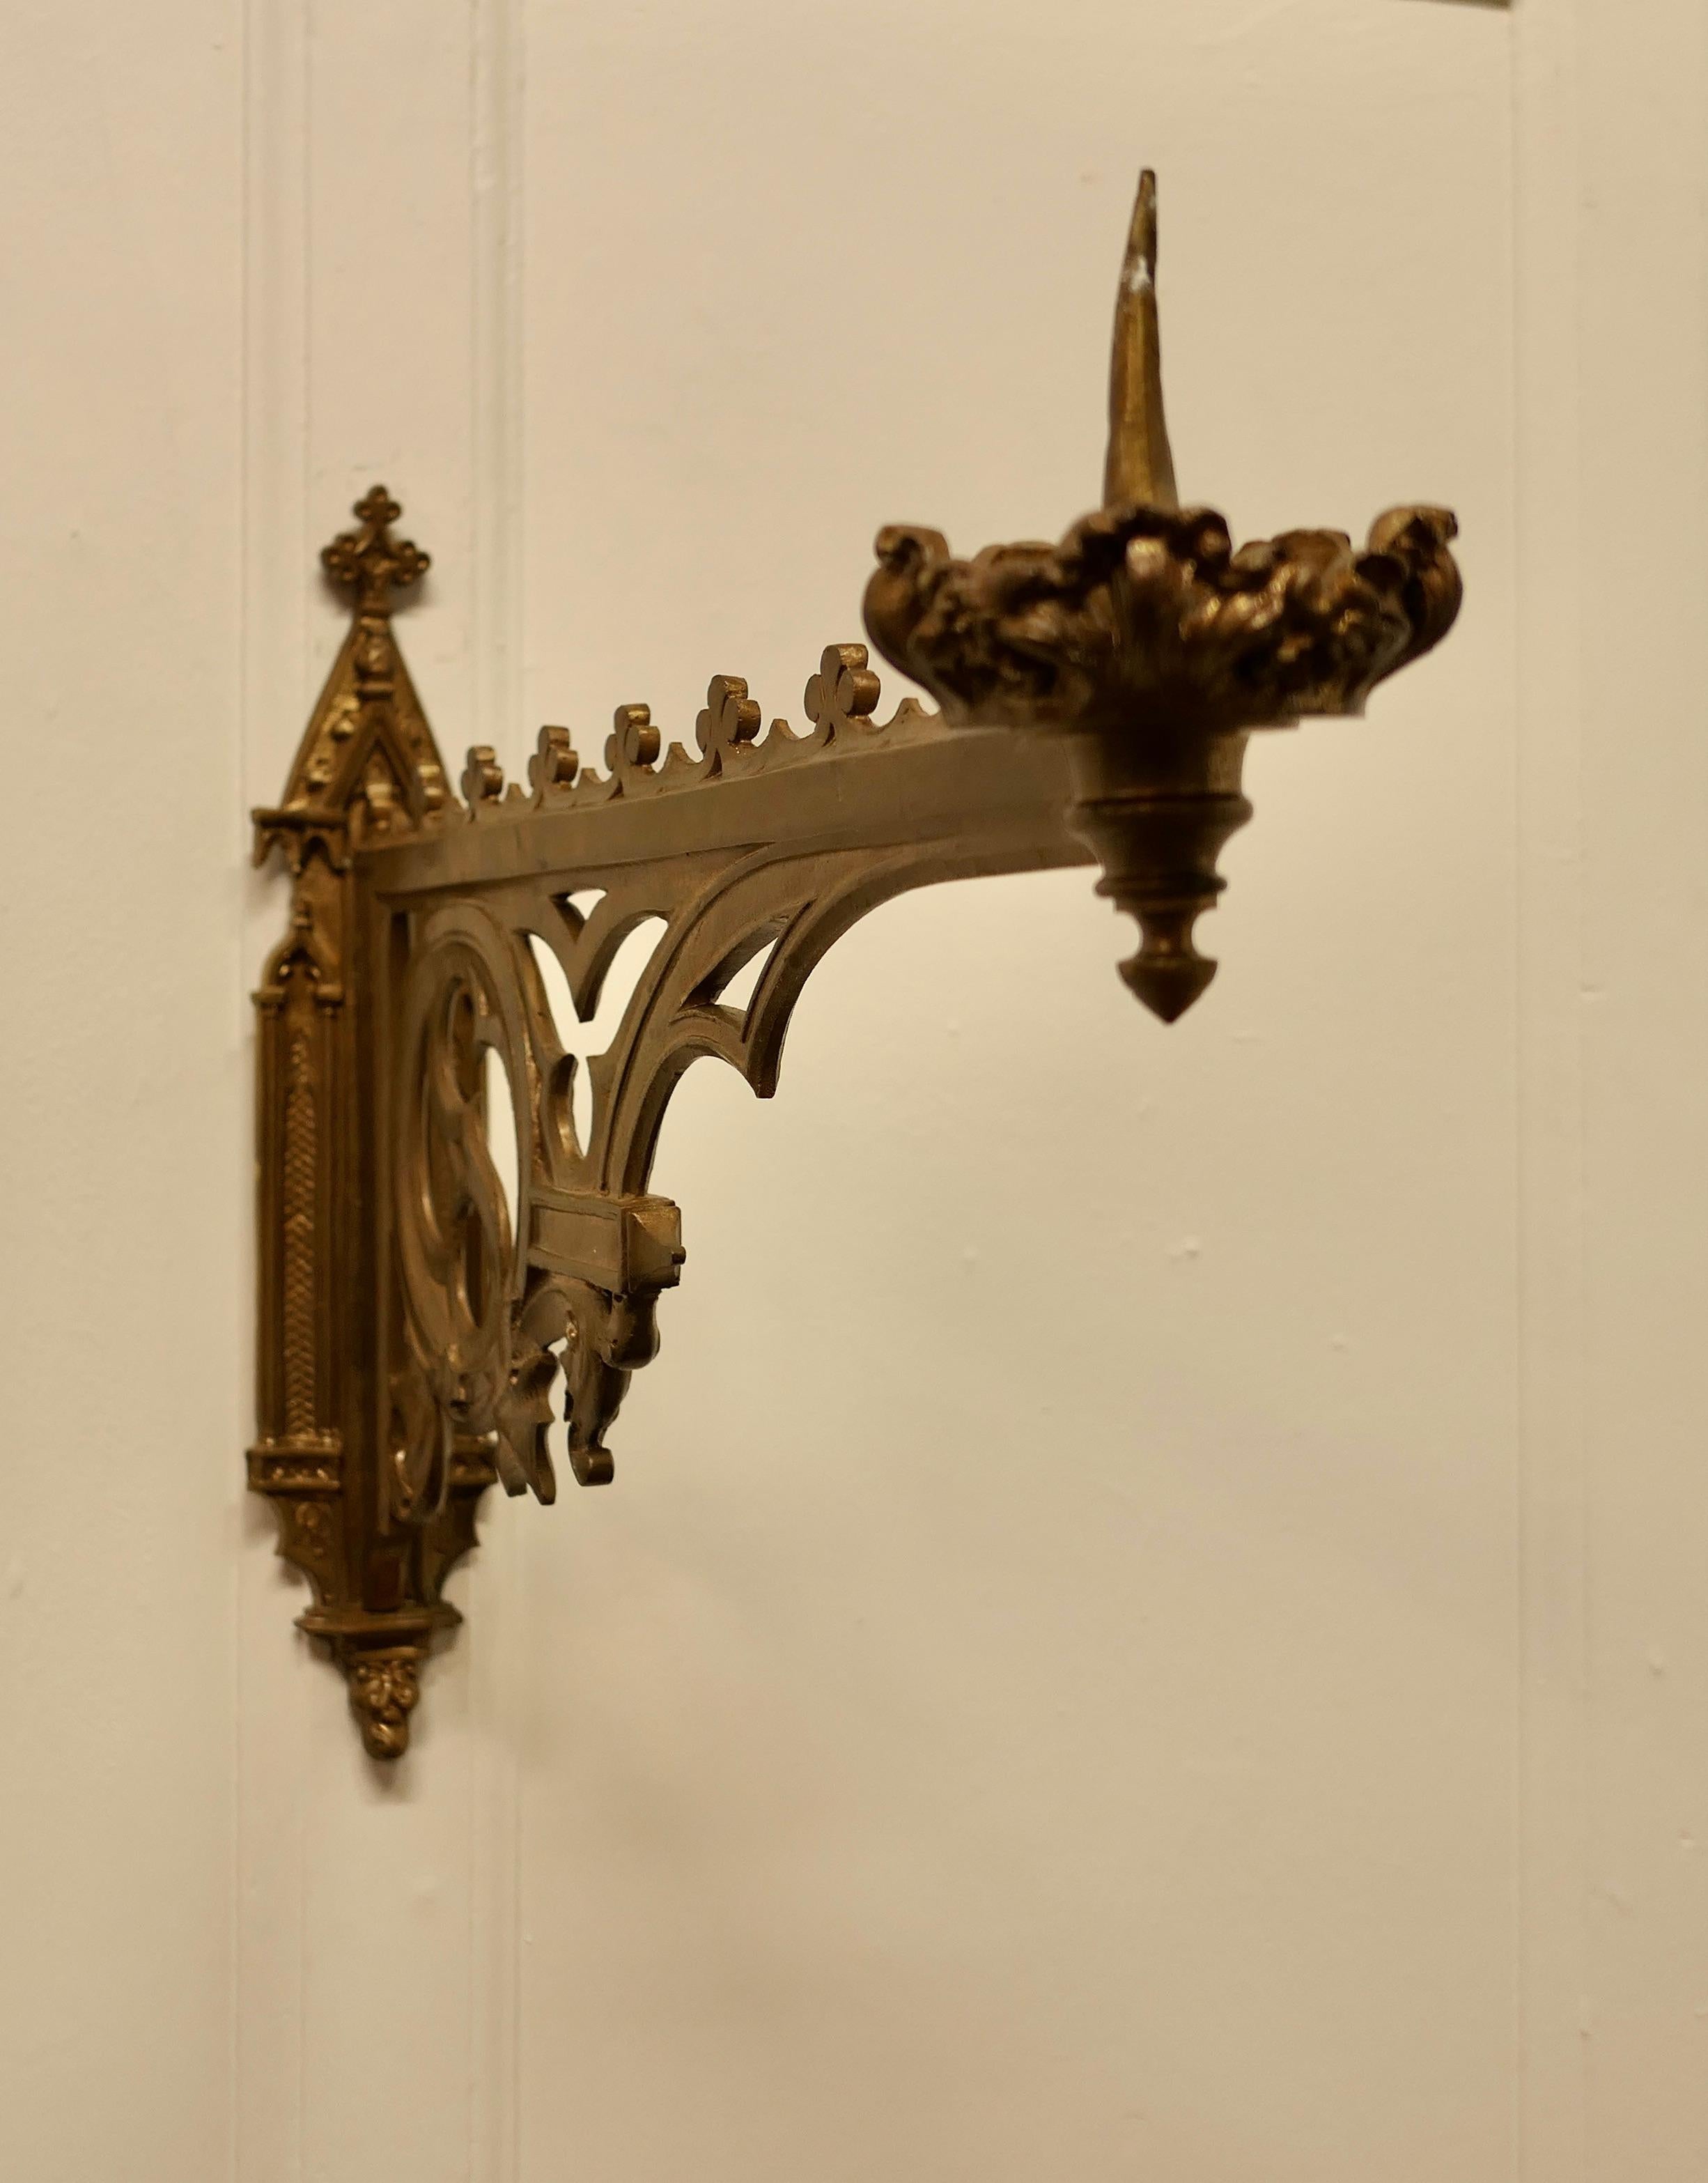 Pair of 19th century French Gothic Wall Sconces

These are a Pair of Large French Arts and Crafts antique wall candle sconces, the brackets have decorative Gothic detail with an arm carrying a large candle sconce which has a decorative drip